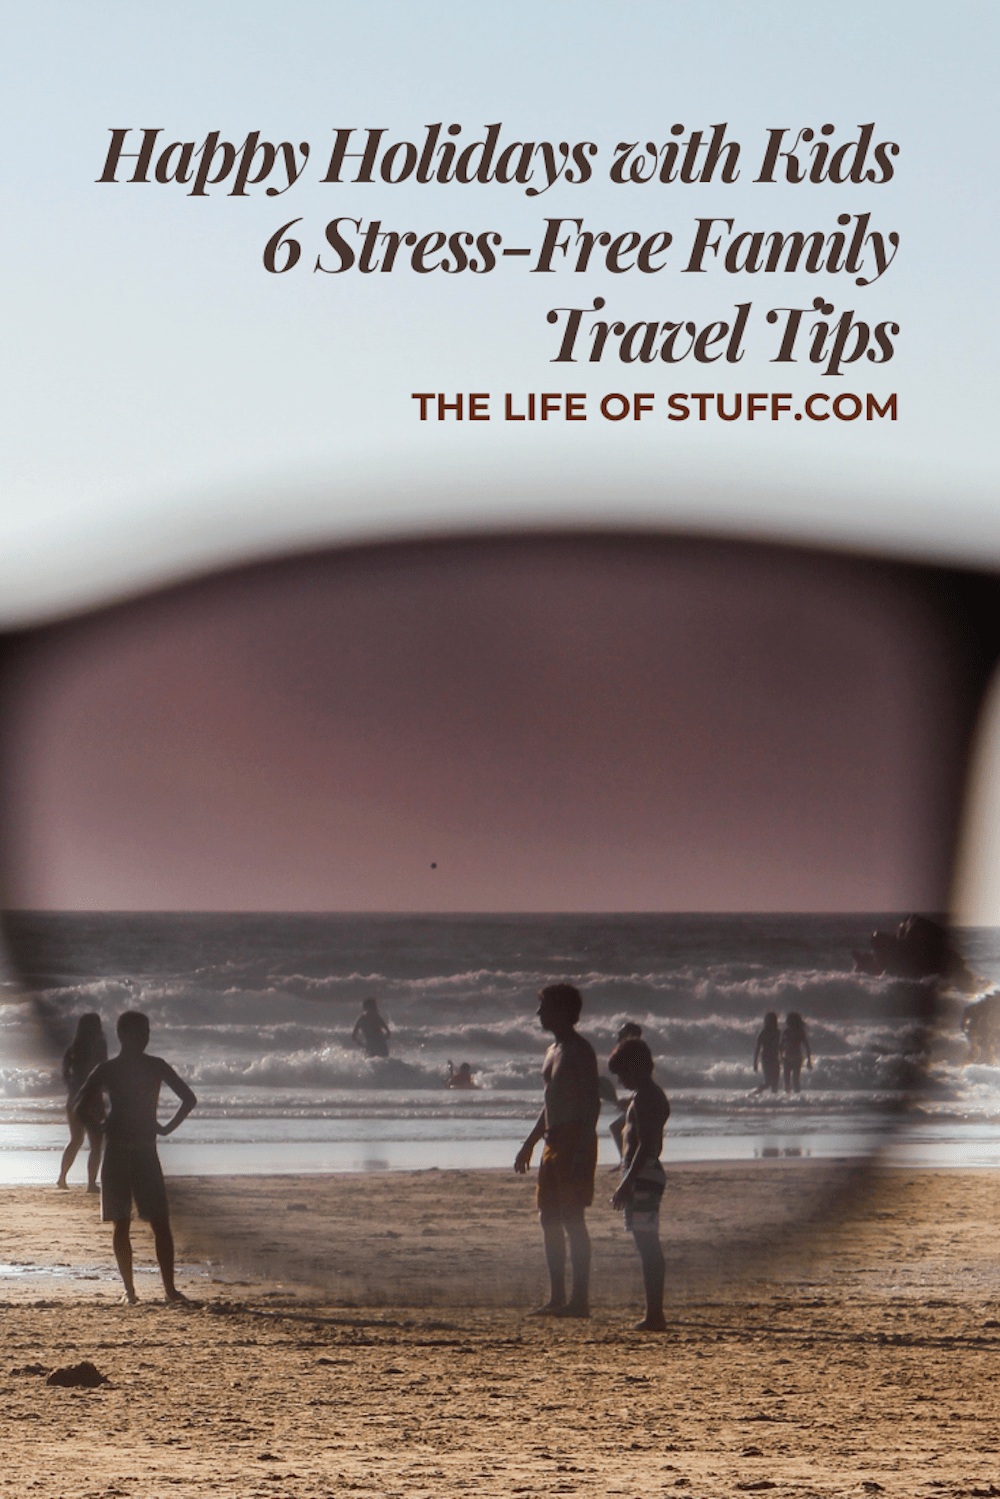 Happy Holidays with Kids - 6 Stress-Free Family Travel Tips - The Life of Stuff.com